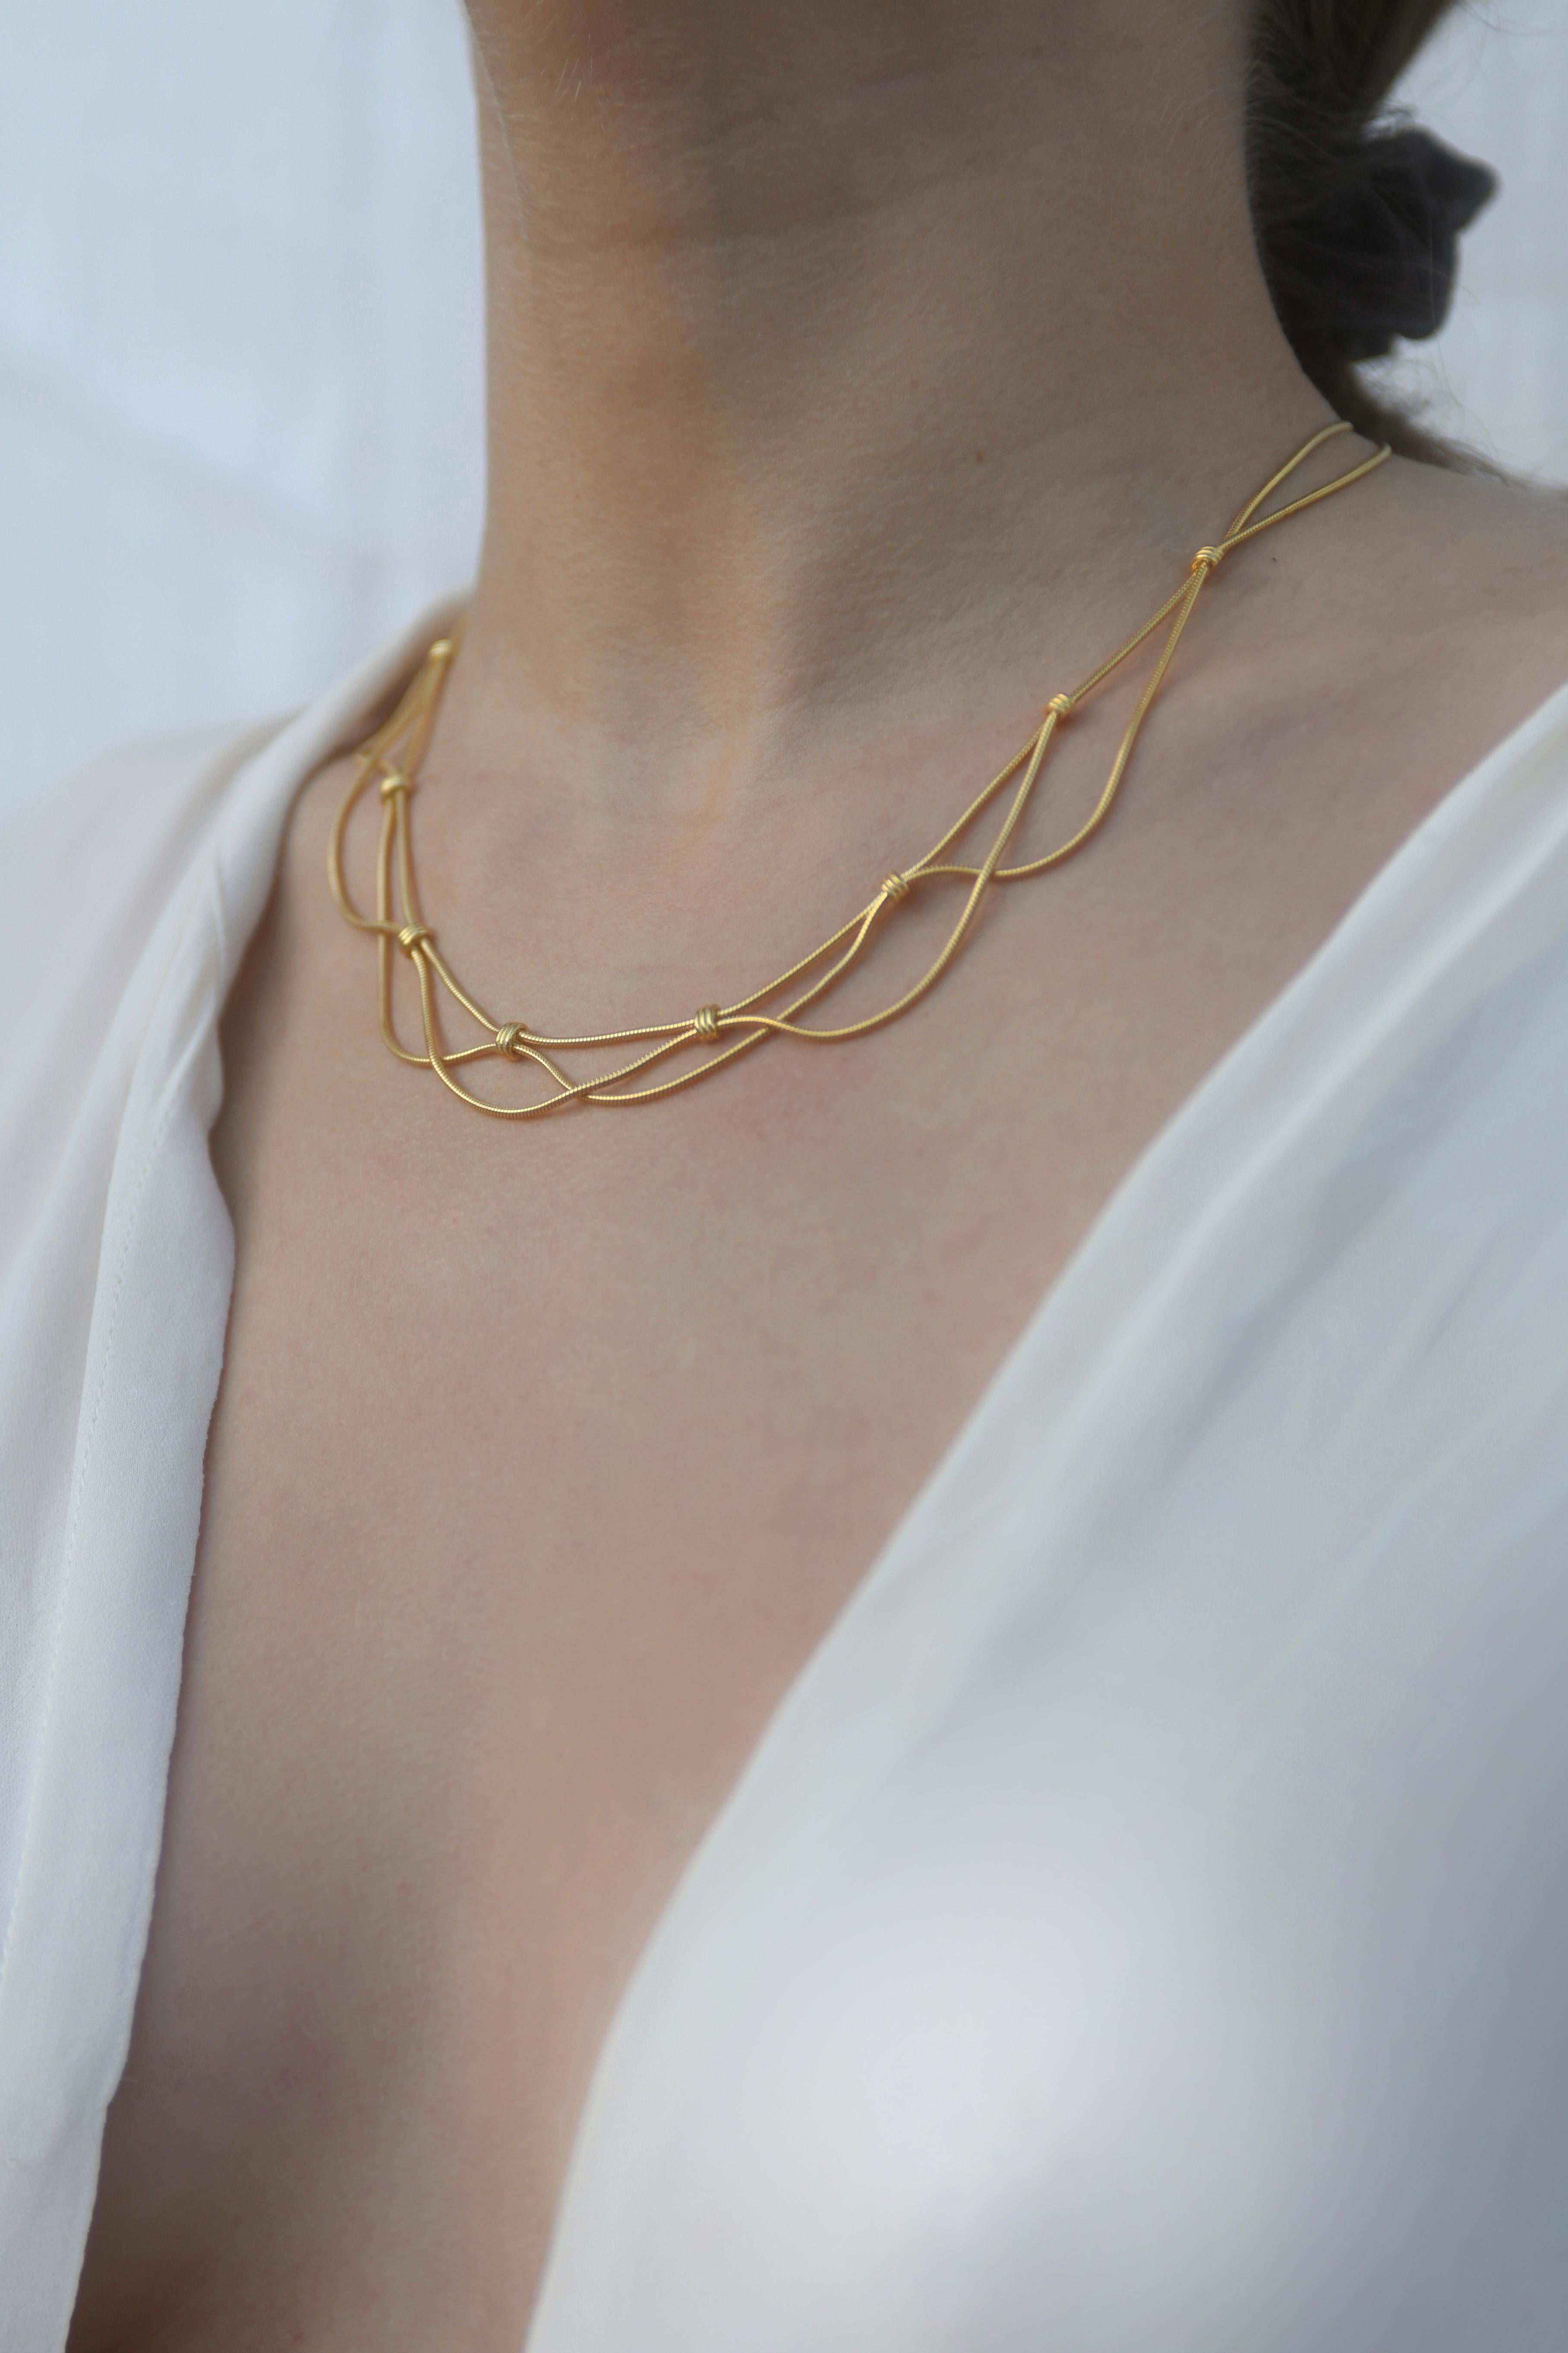  Aura full necklace

A graceful piece inspired by the movement of nature. This piece is made out of gold plated snake chain and will bring elegance to any outfit..Metal: Gold plated sterling silver. The chain chain has been individually hand-cut and